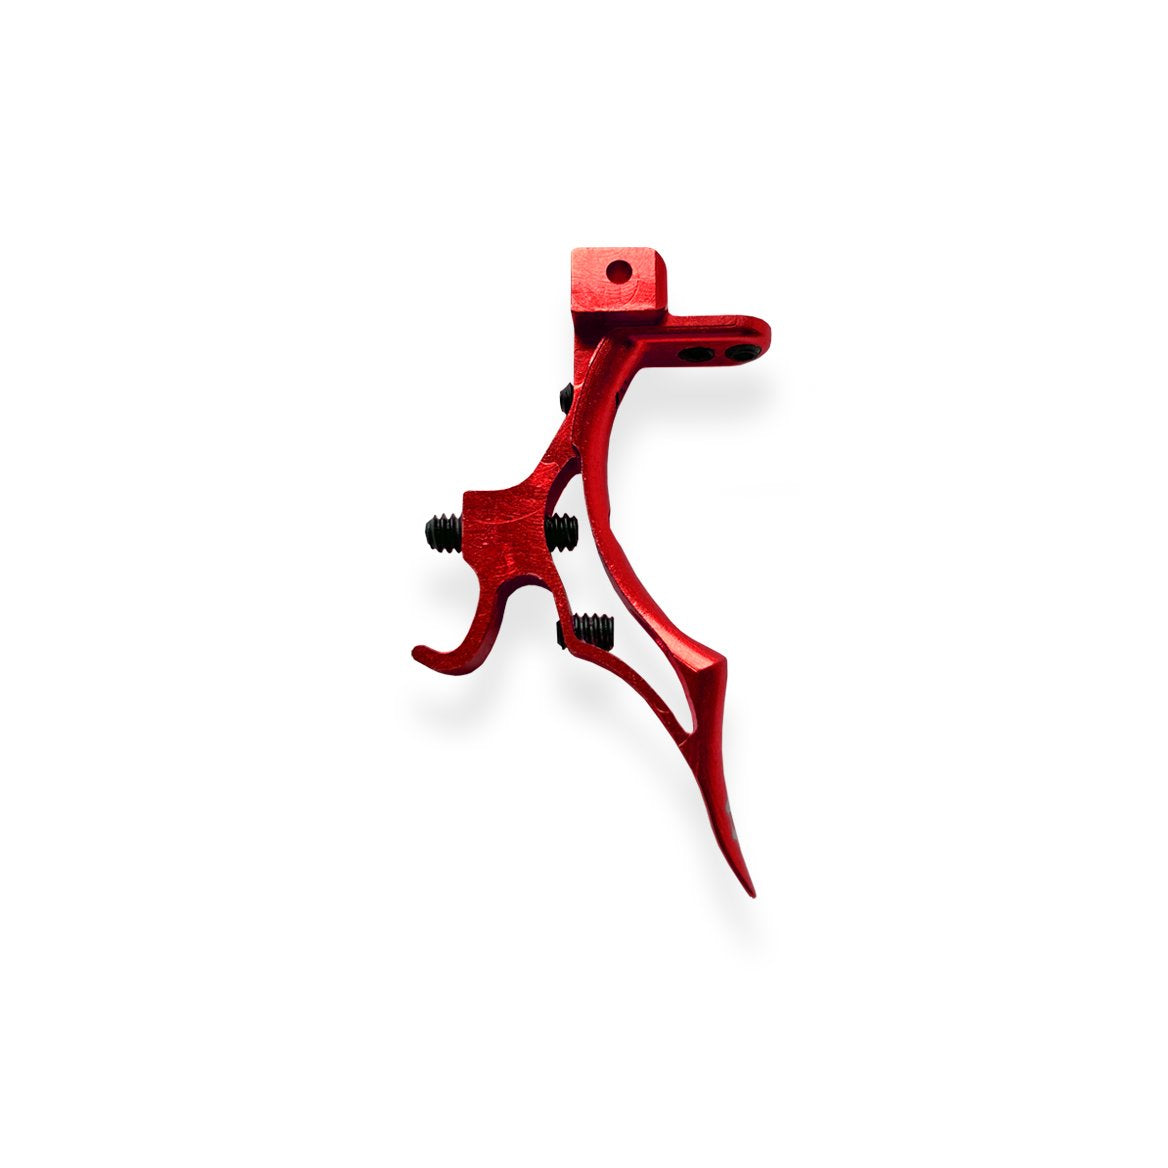  GEO "Type S" Deuce Trigger (Fits LV1, LV1.6 LV1.1, LV1.5, LVR, GEO 3.5) - Eminent Paintball And Airsoft